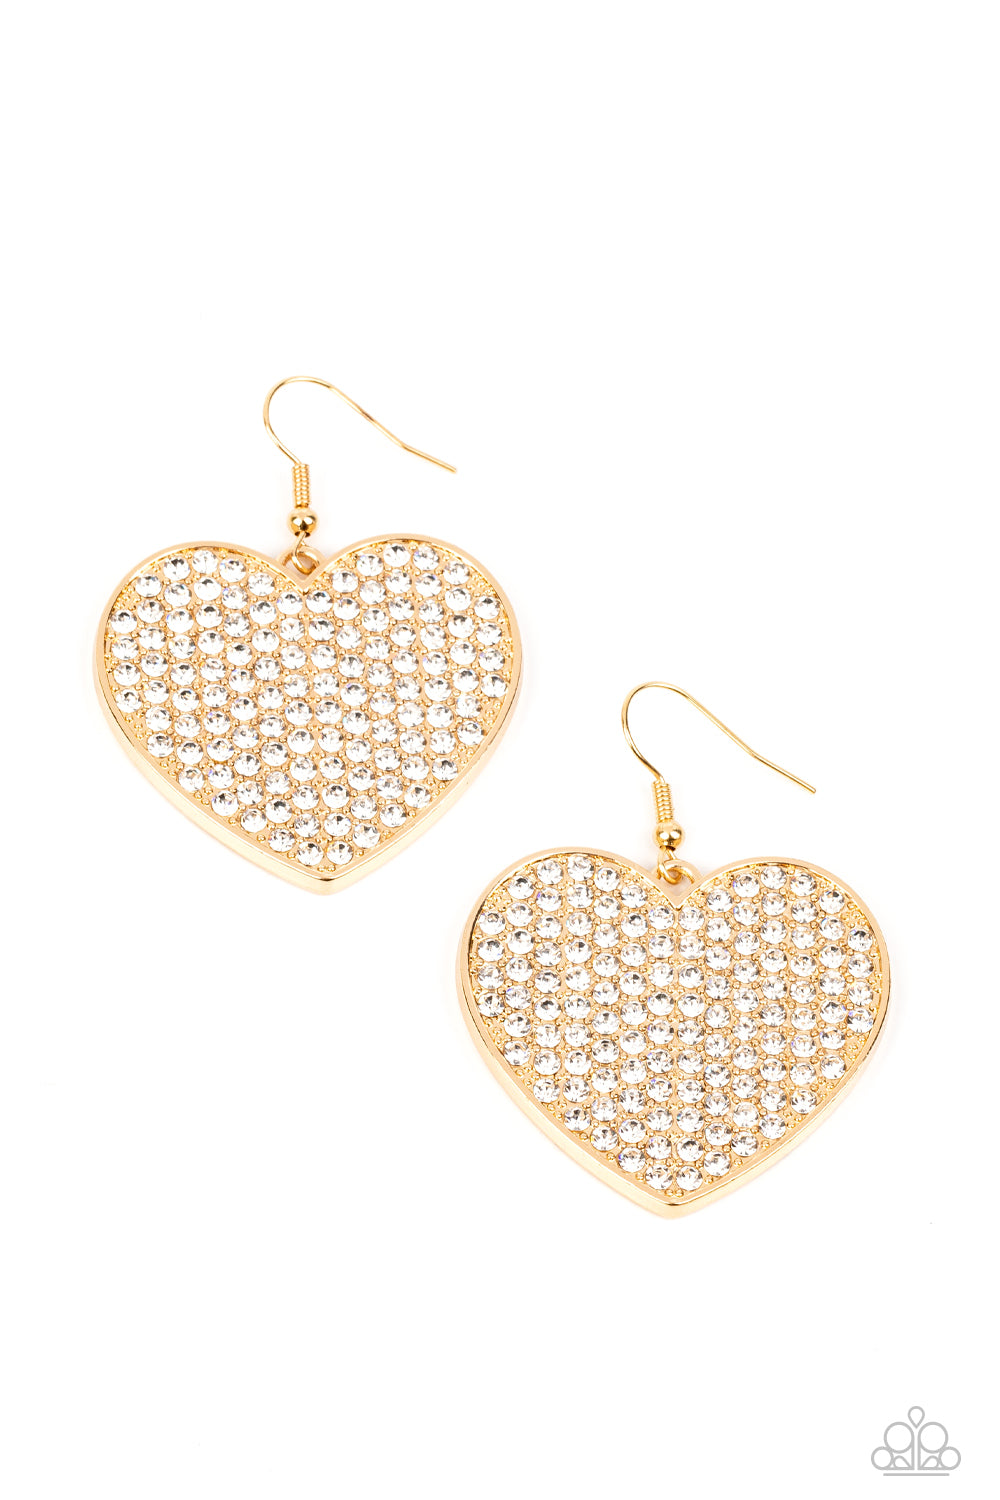 Paparazzi Accessories Romantic Reign - Gold A shiny, oversized gold heart is covered in tiny white rhinestones, emitting radiant shimmer as it swings from the ear. Earring attaches to a standard fishhook fitting. Sold as one pair of earrings. Jewelry